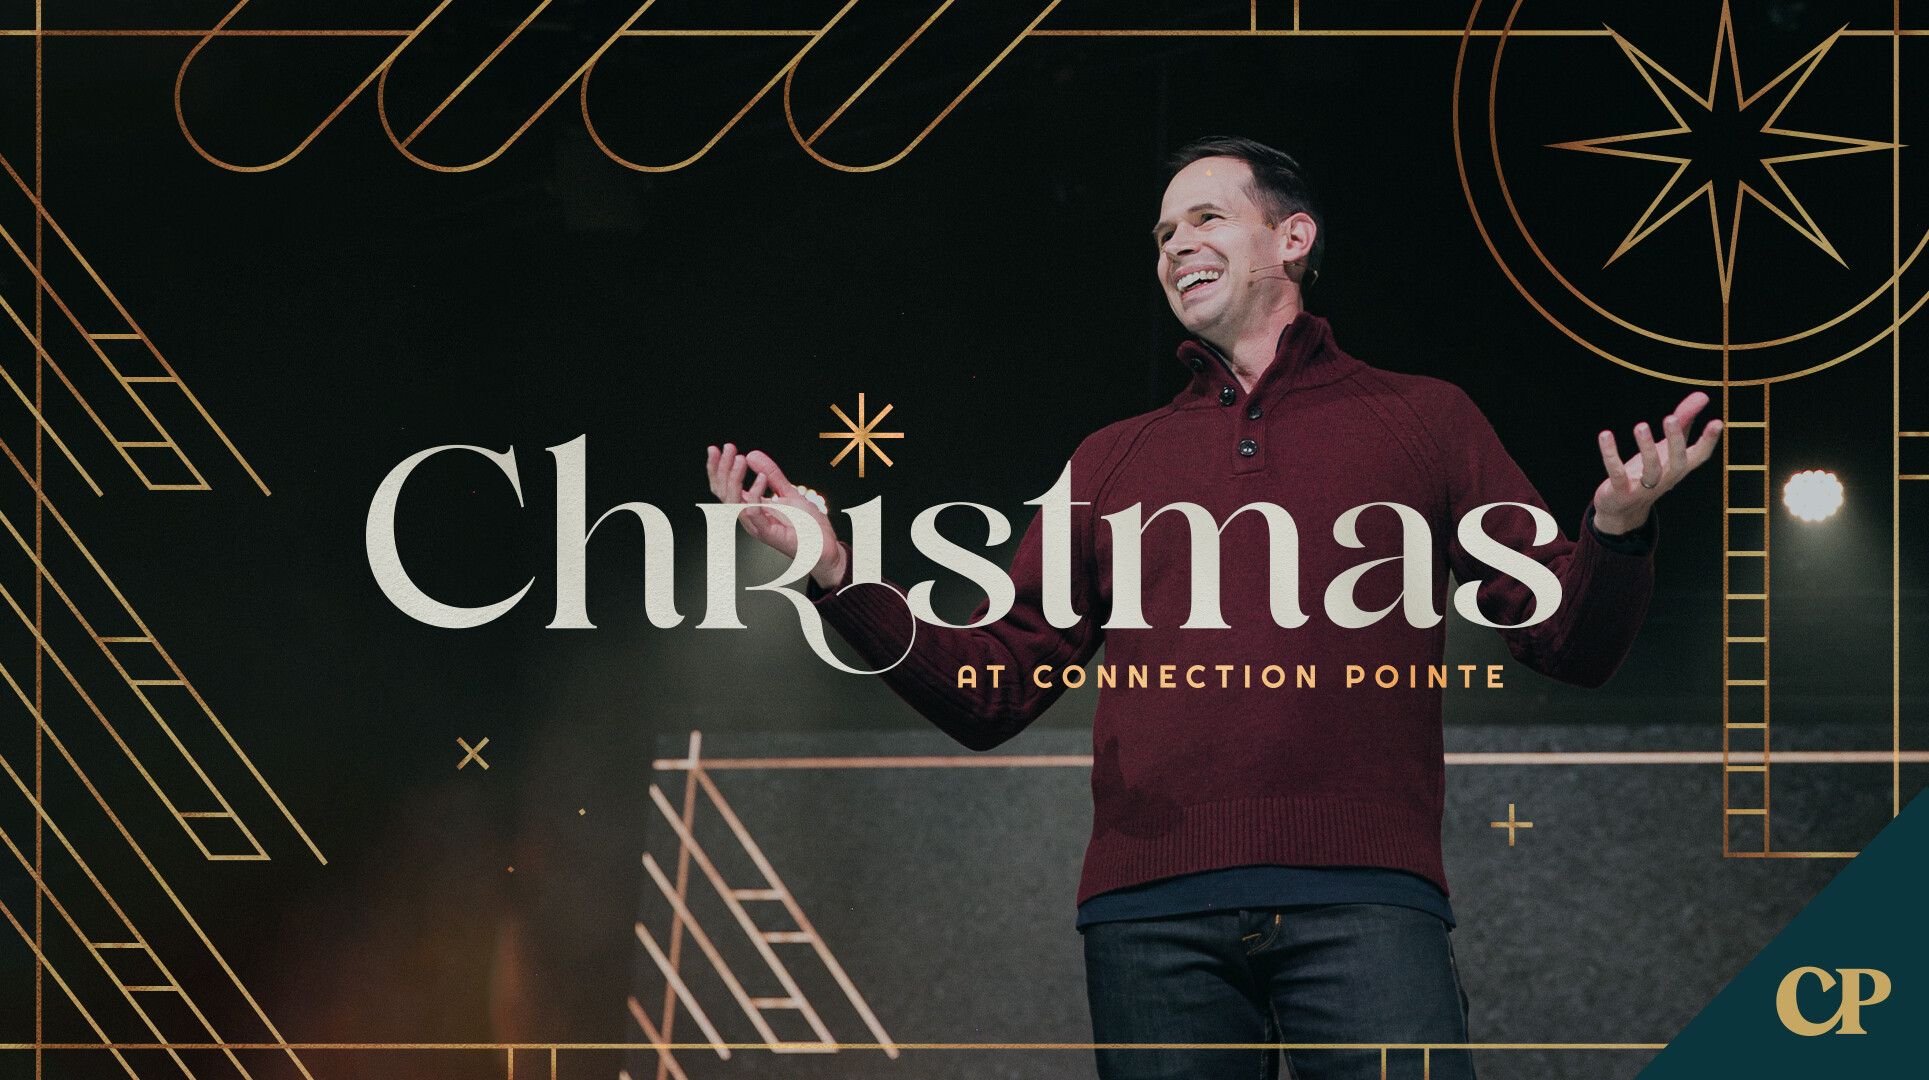 Christmas at Connection Pointe